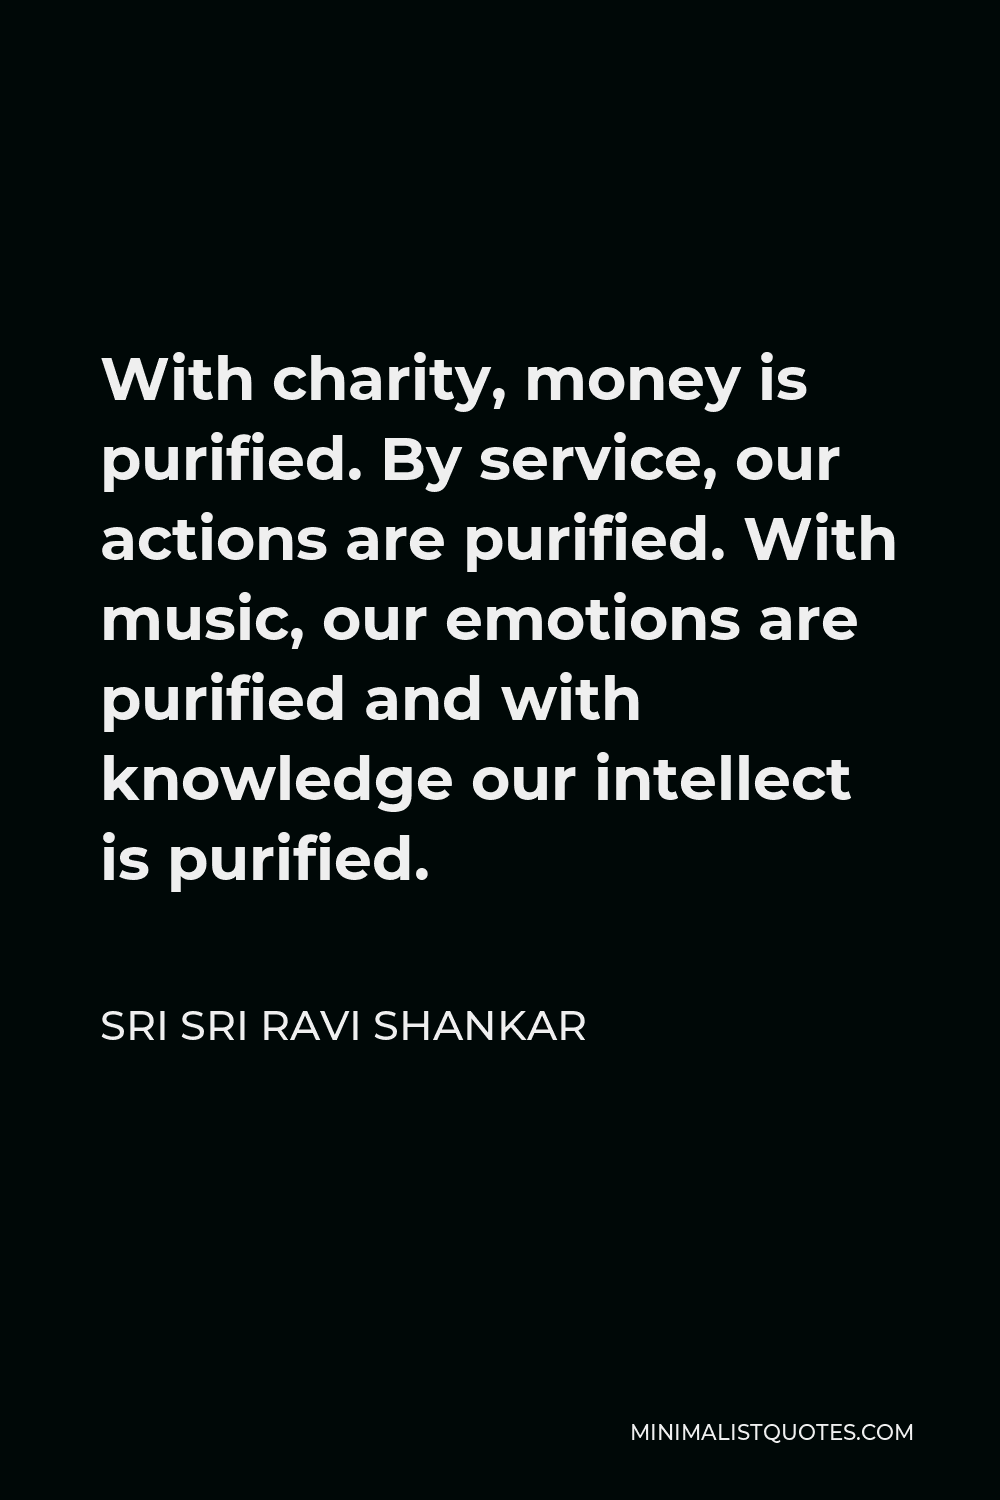 Sri Sri Ravi Shankar quote: Everything is cleansed and purified by